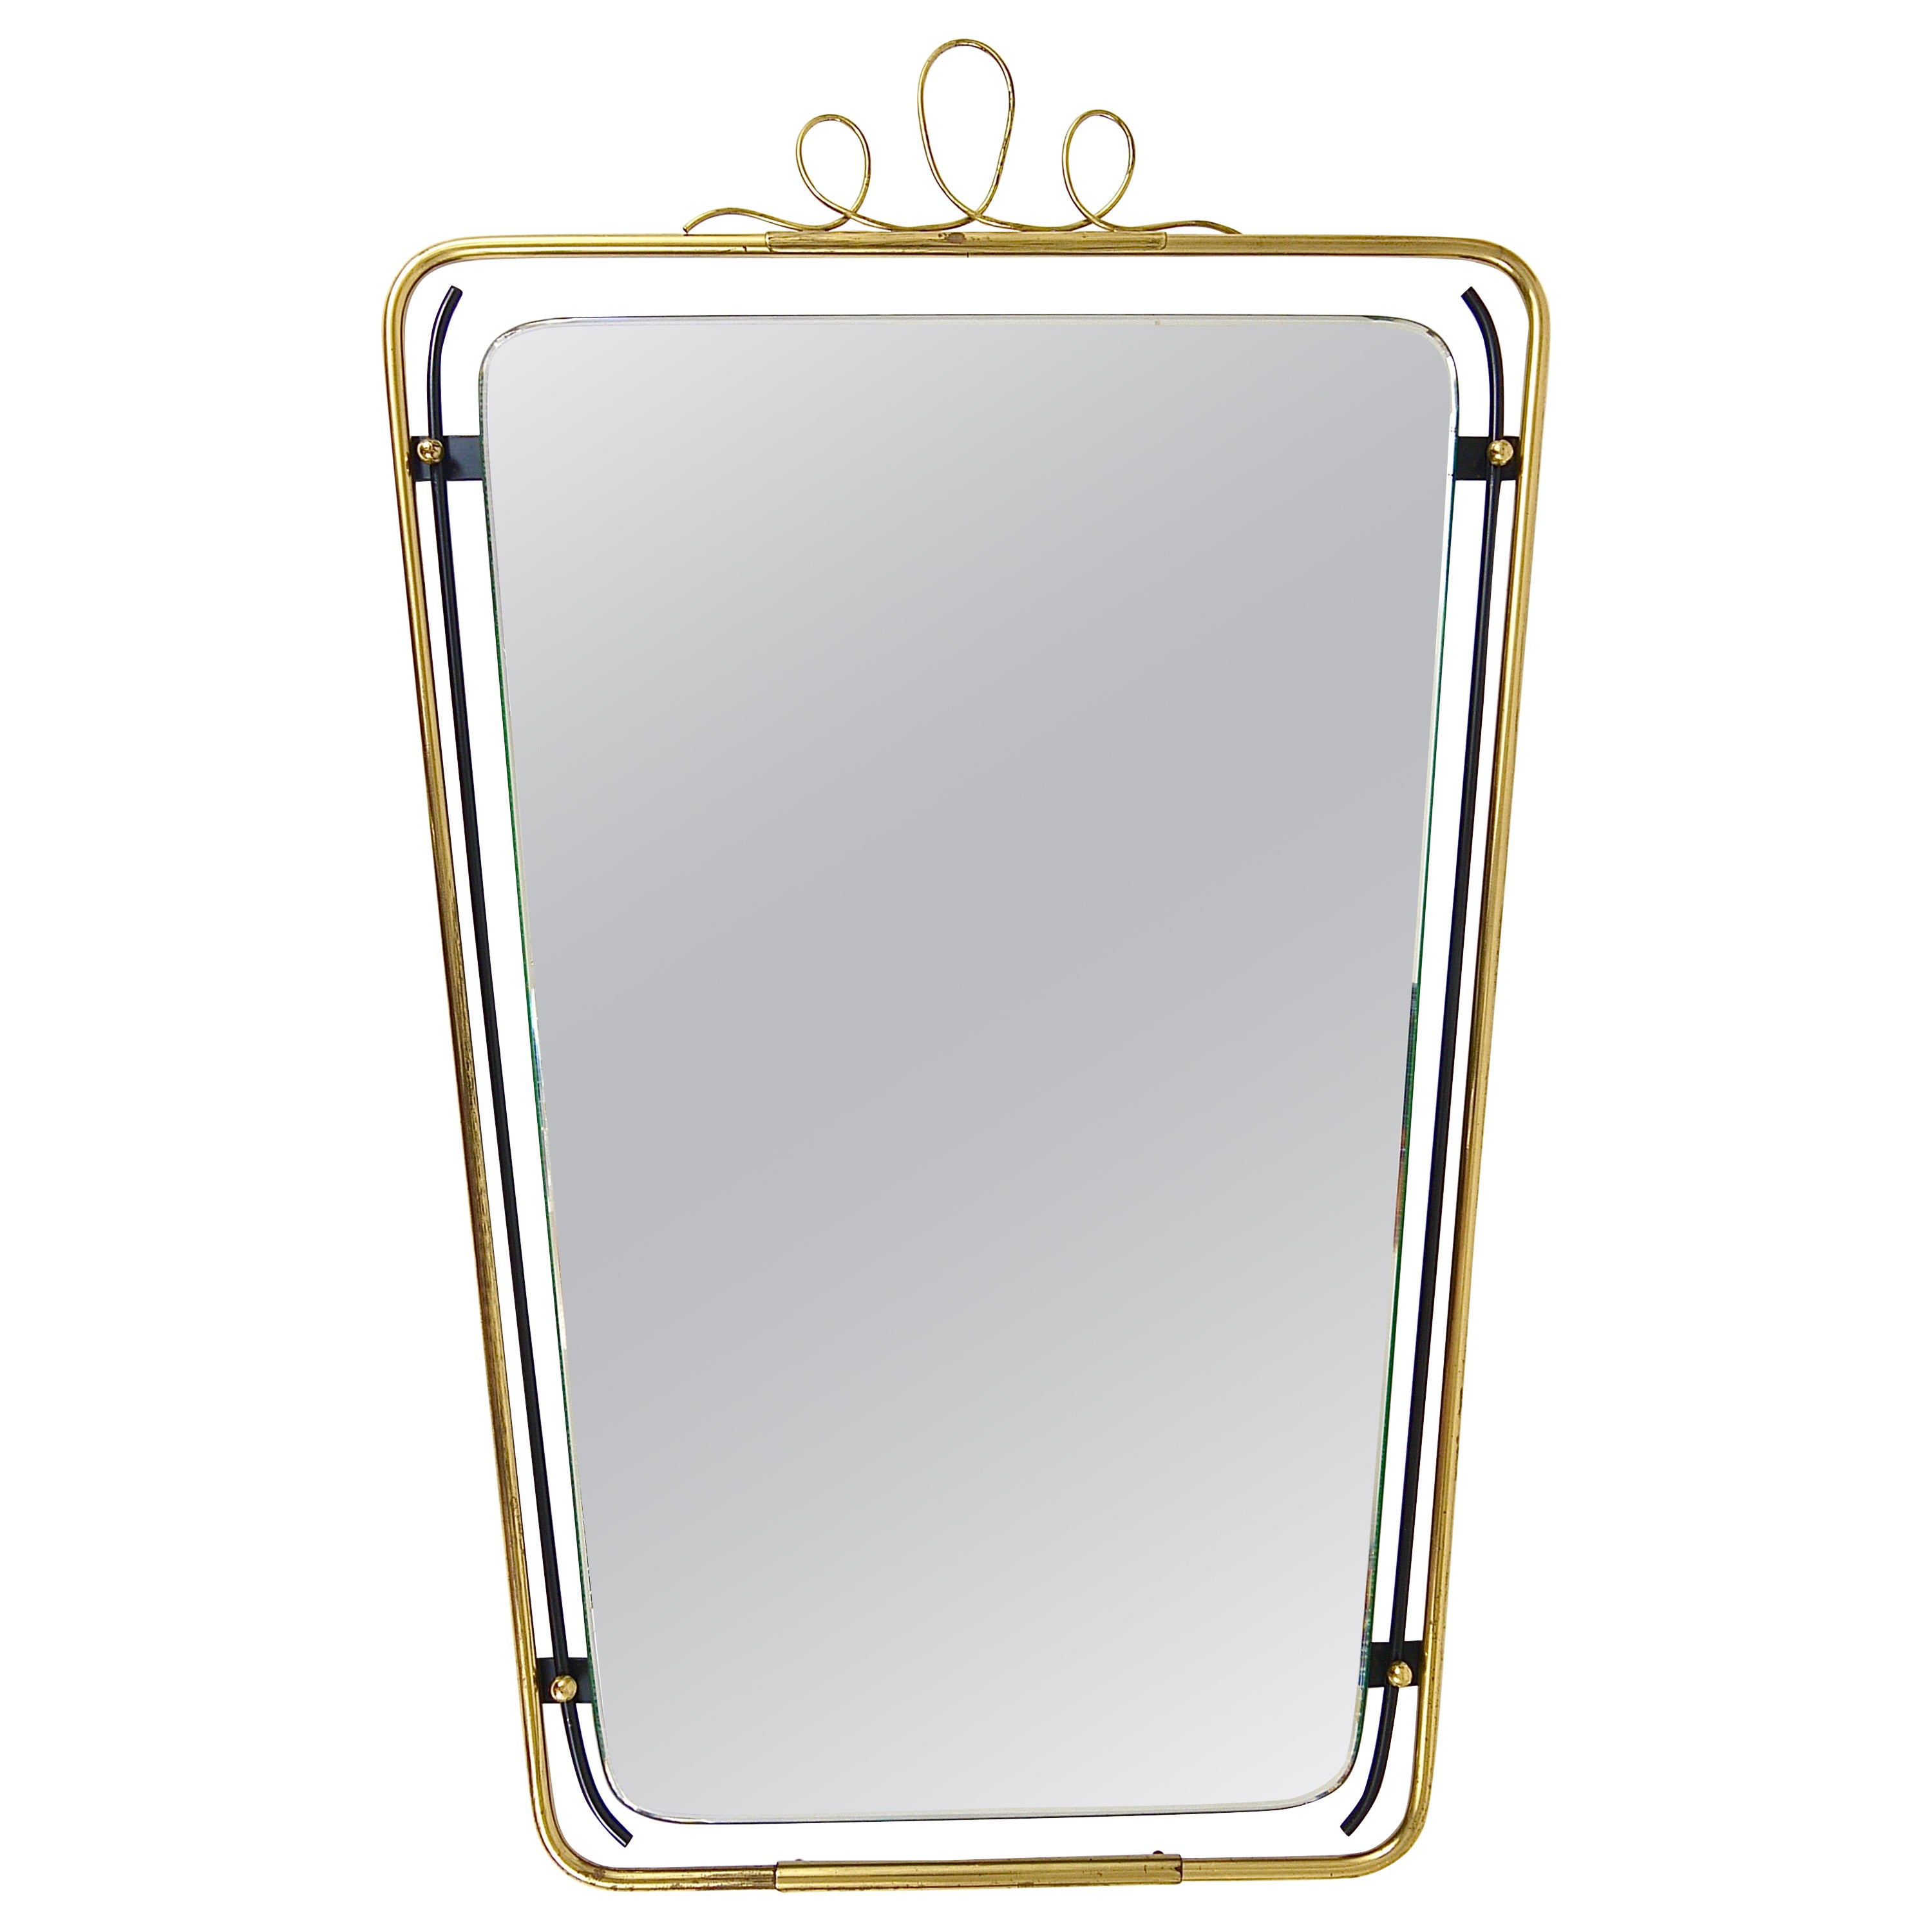 Midcentury Modern Brass Loops Wire Wall mirror, Italy, 1950s